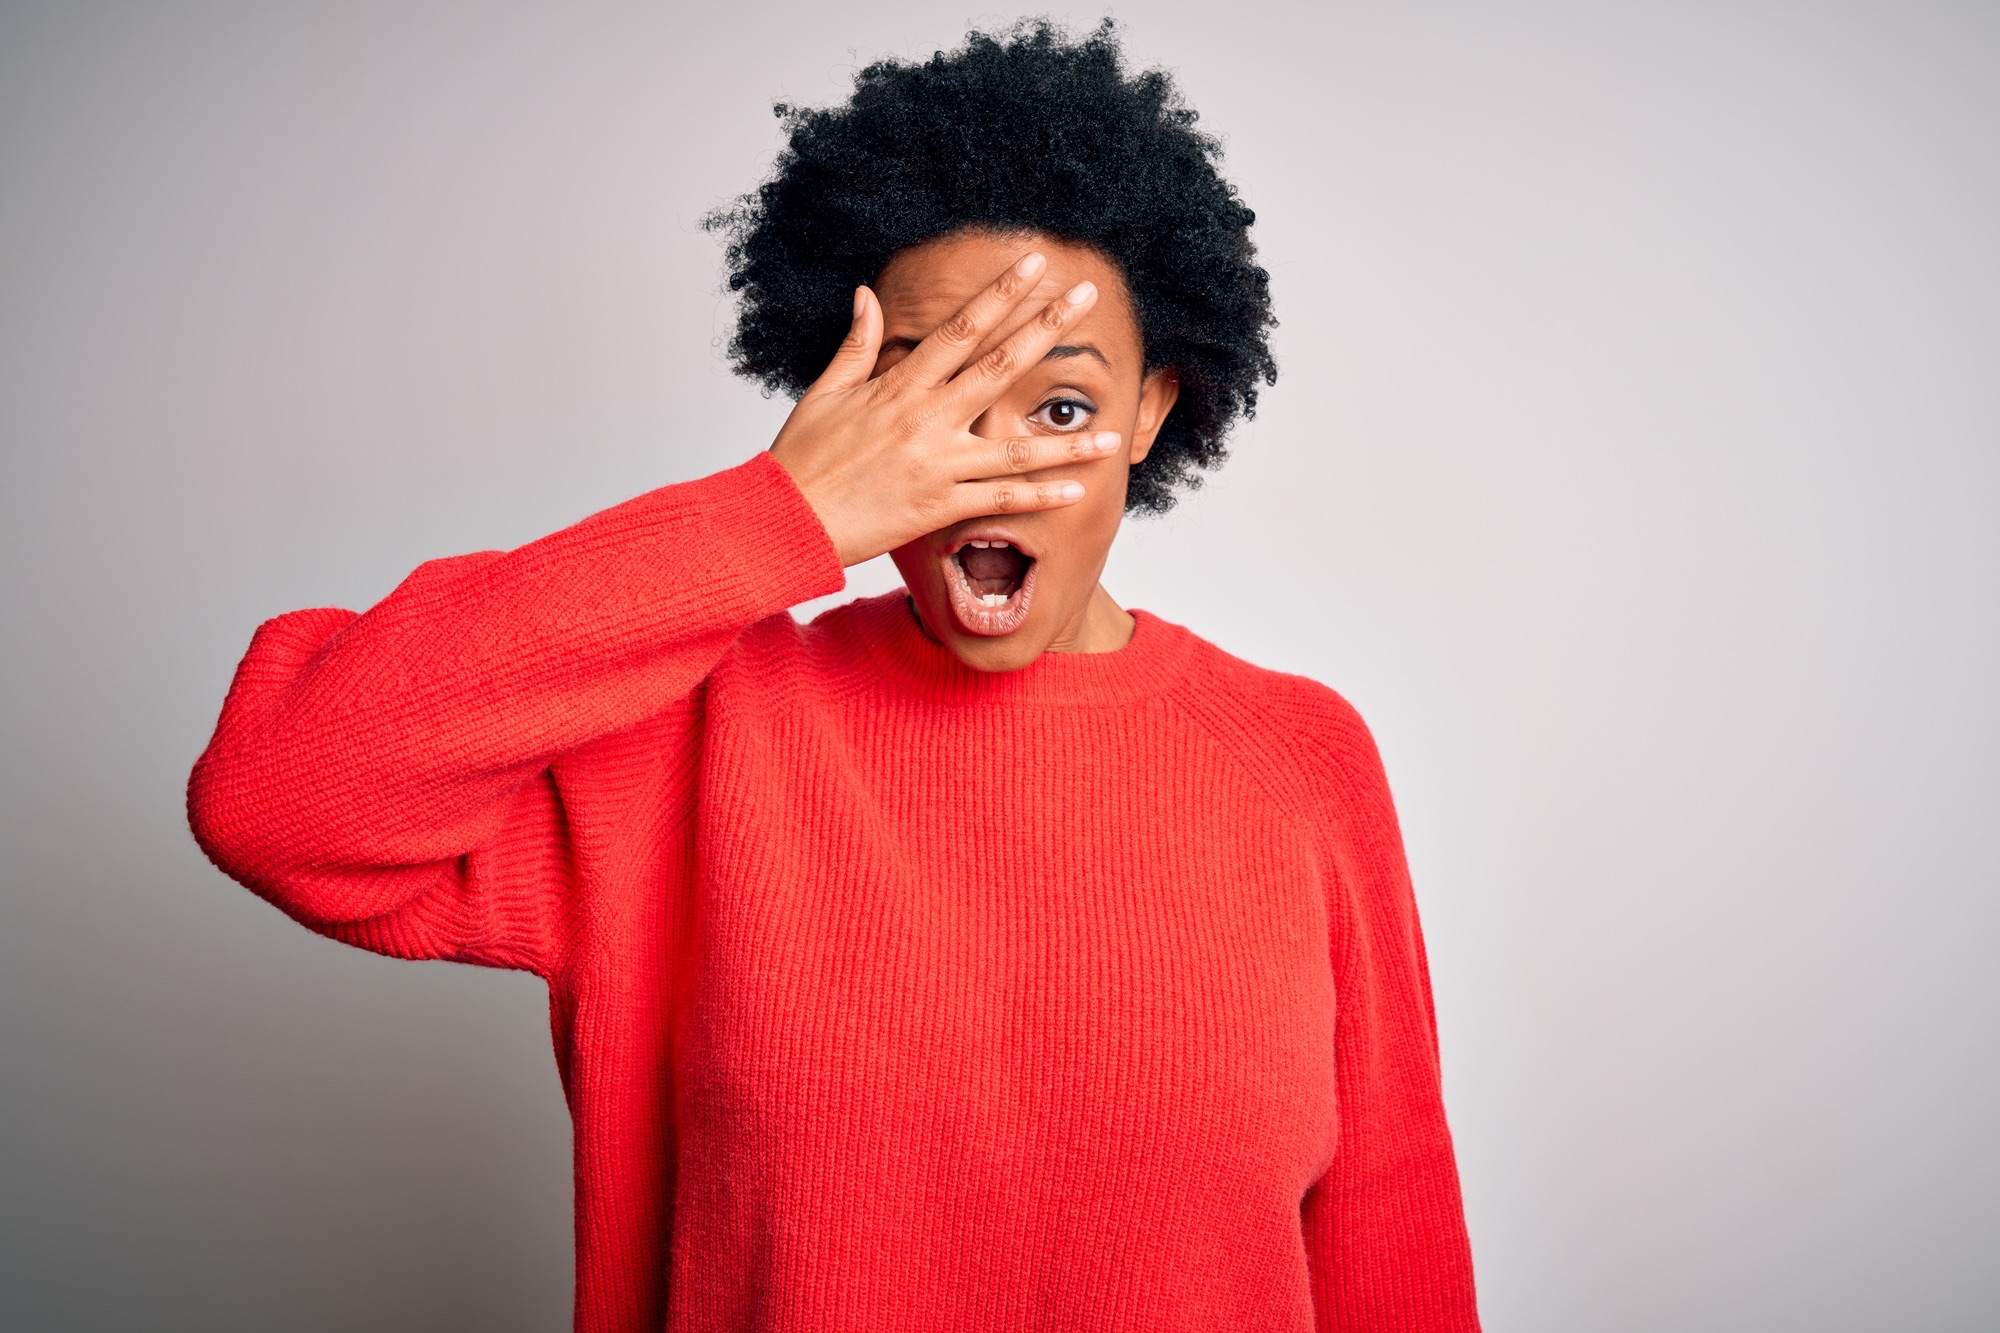 Young beautiful African American afro woman with curly hair wearing red casual sweater peeking in shock covering face and eyes with hand, looking through fingers with embarrassed expression.